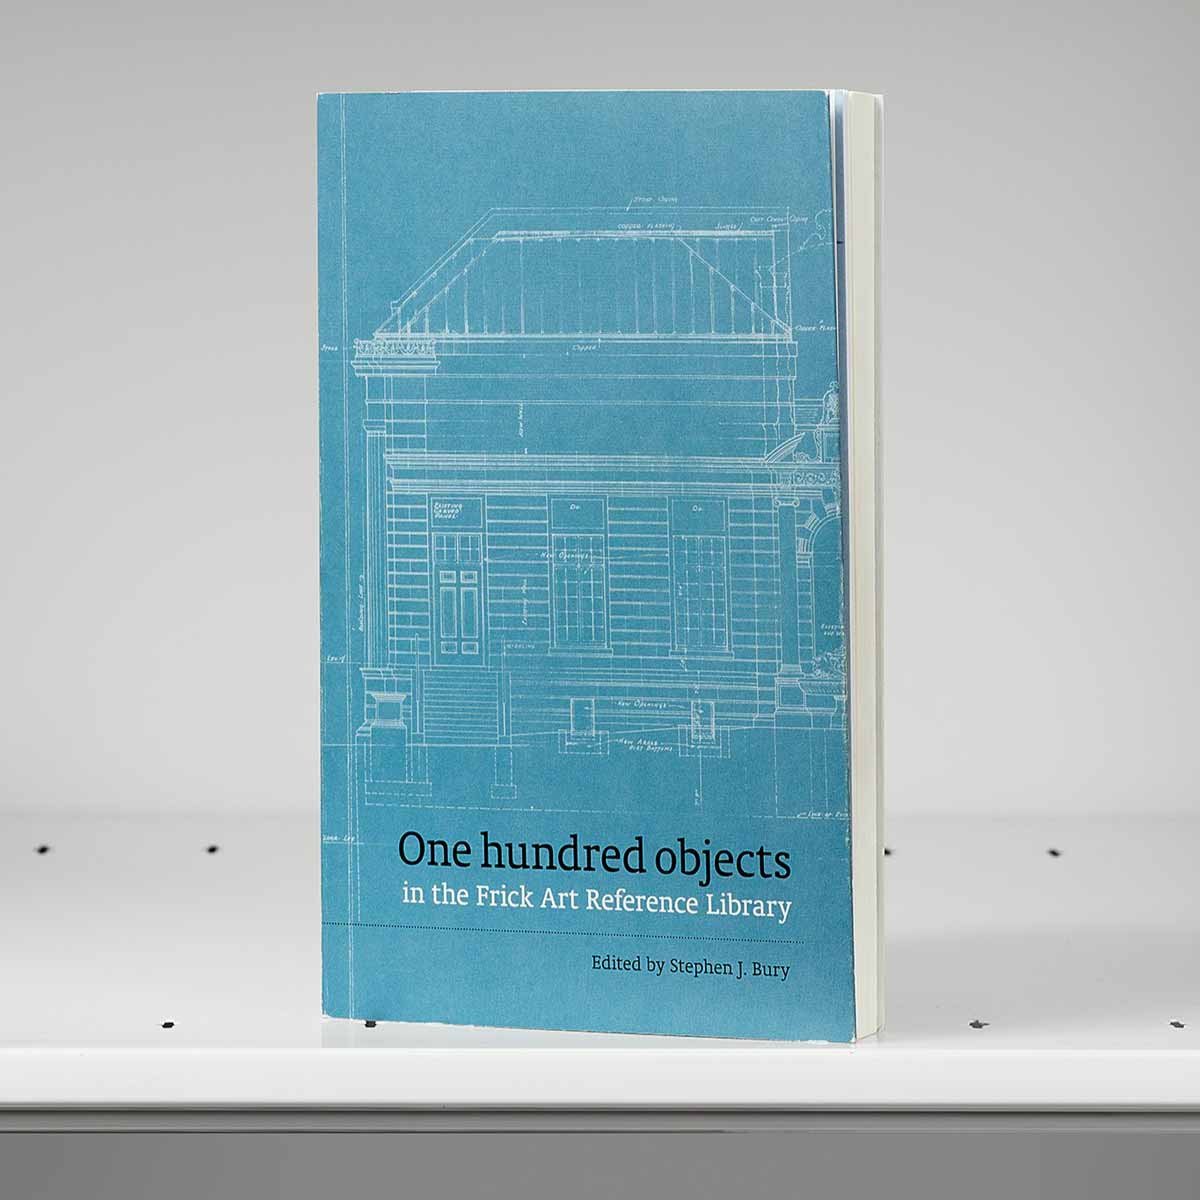 Book cover featuring blueprint architectural plans